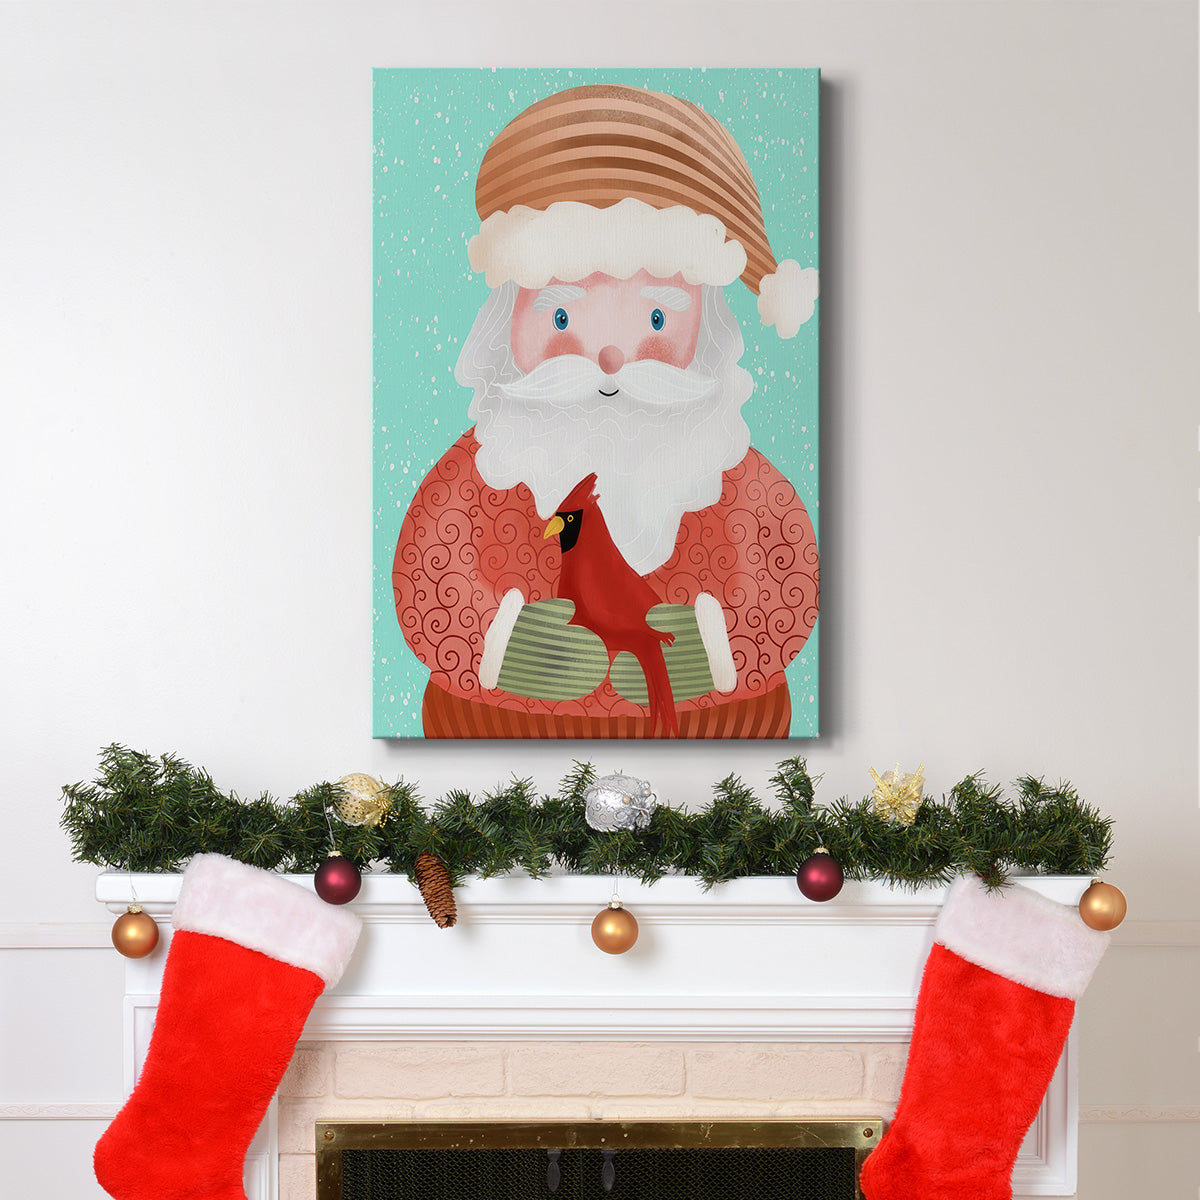 Santa Pack I - Gallery Wrapped Canvas